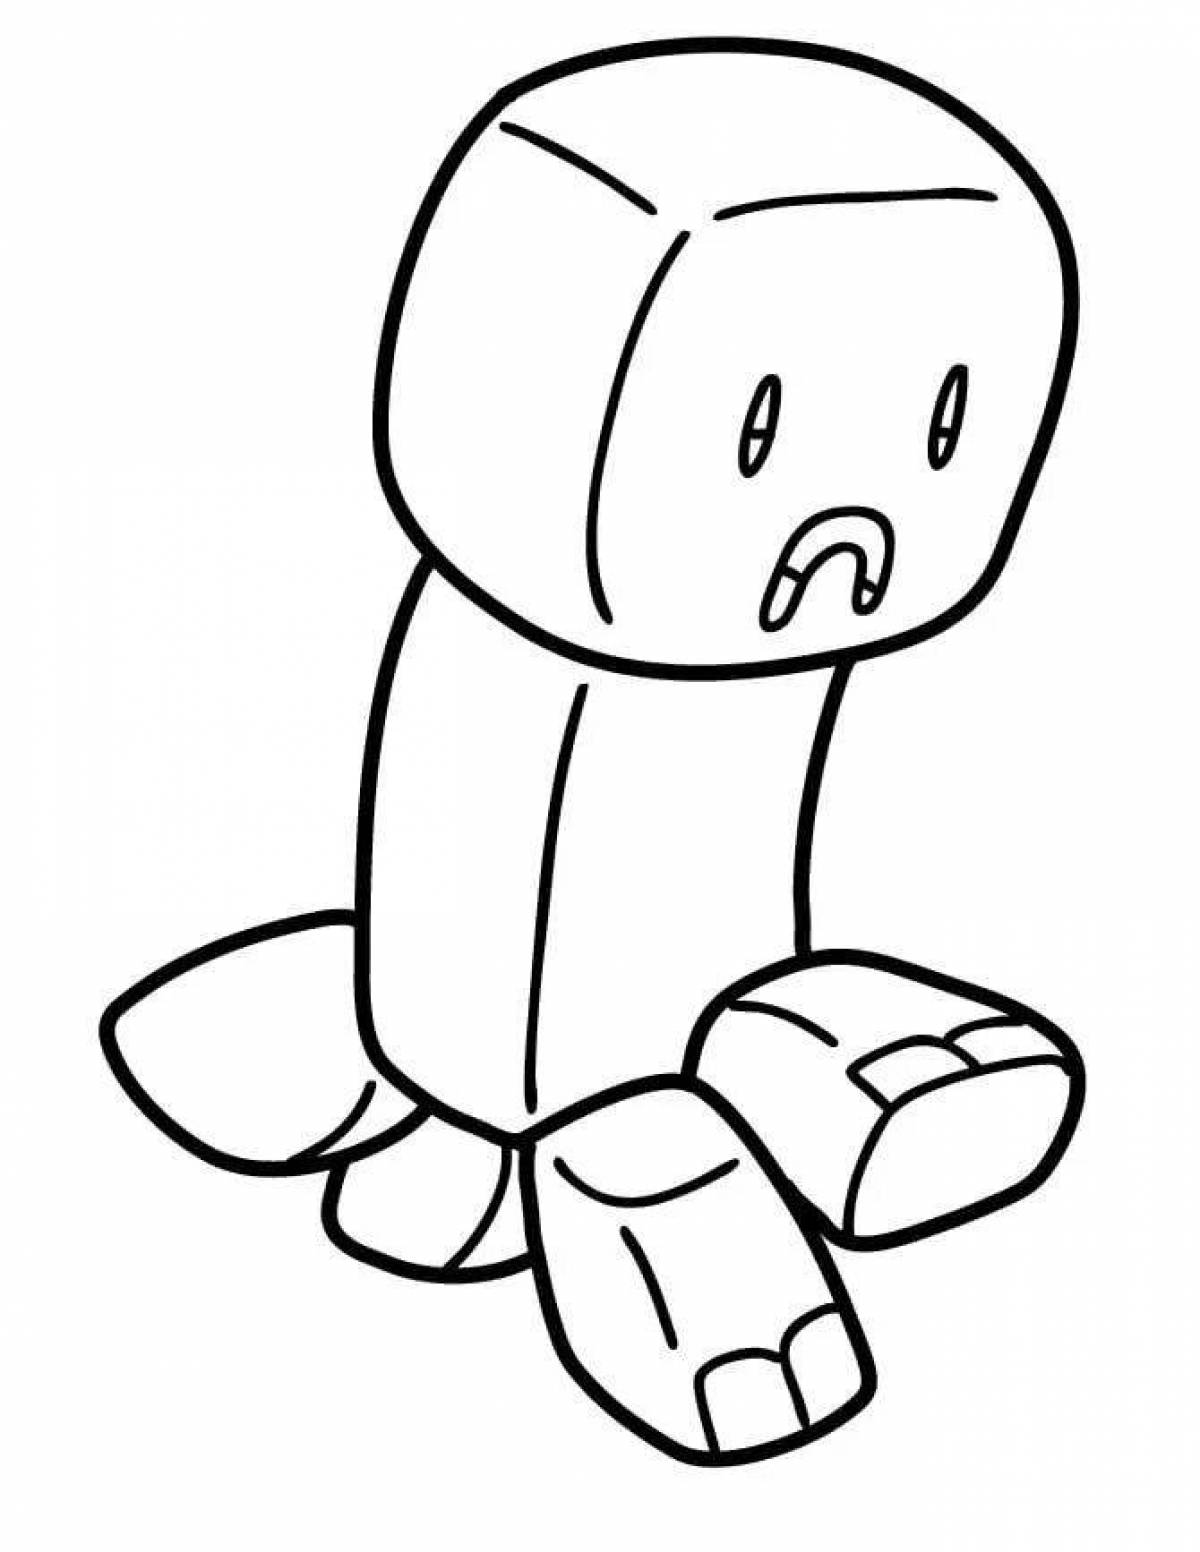 Playful minecraft creeper coloring page